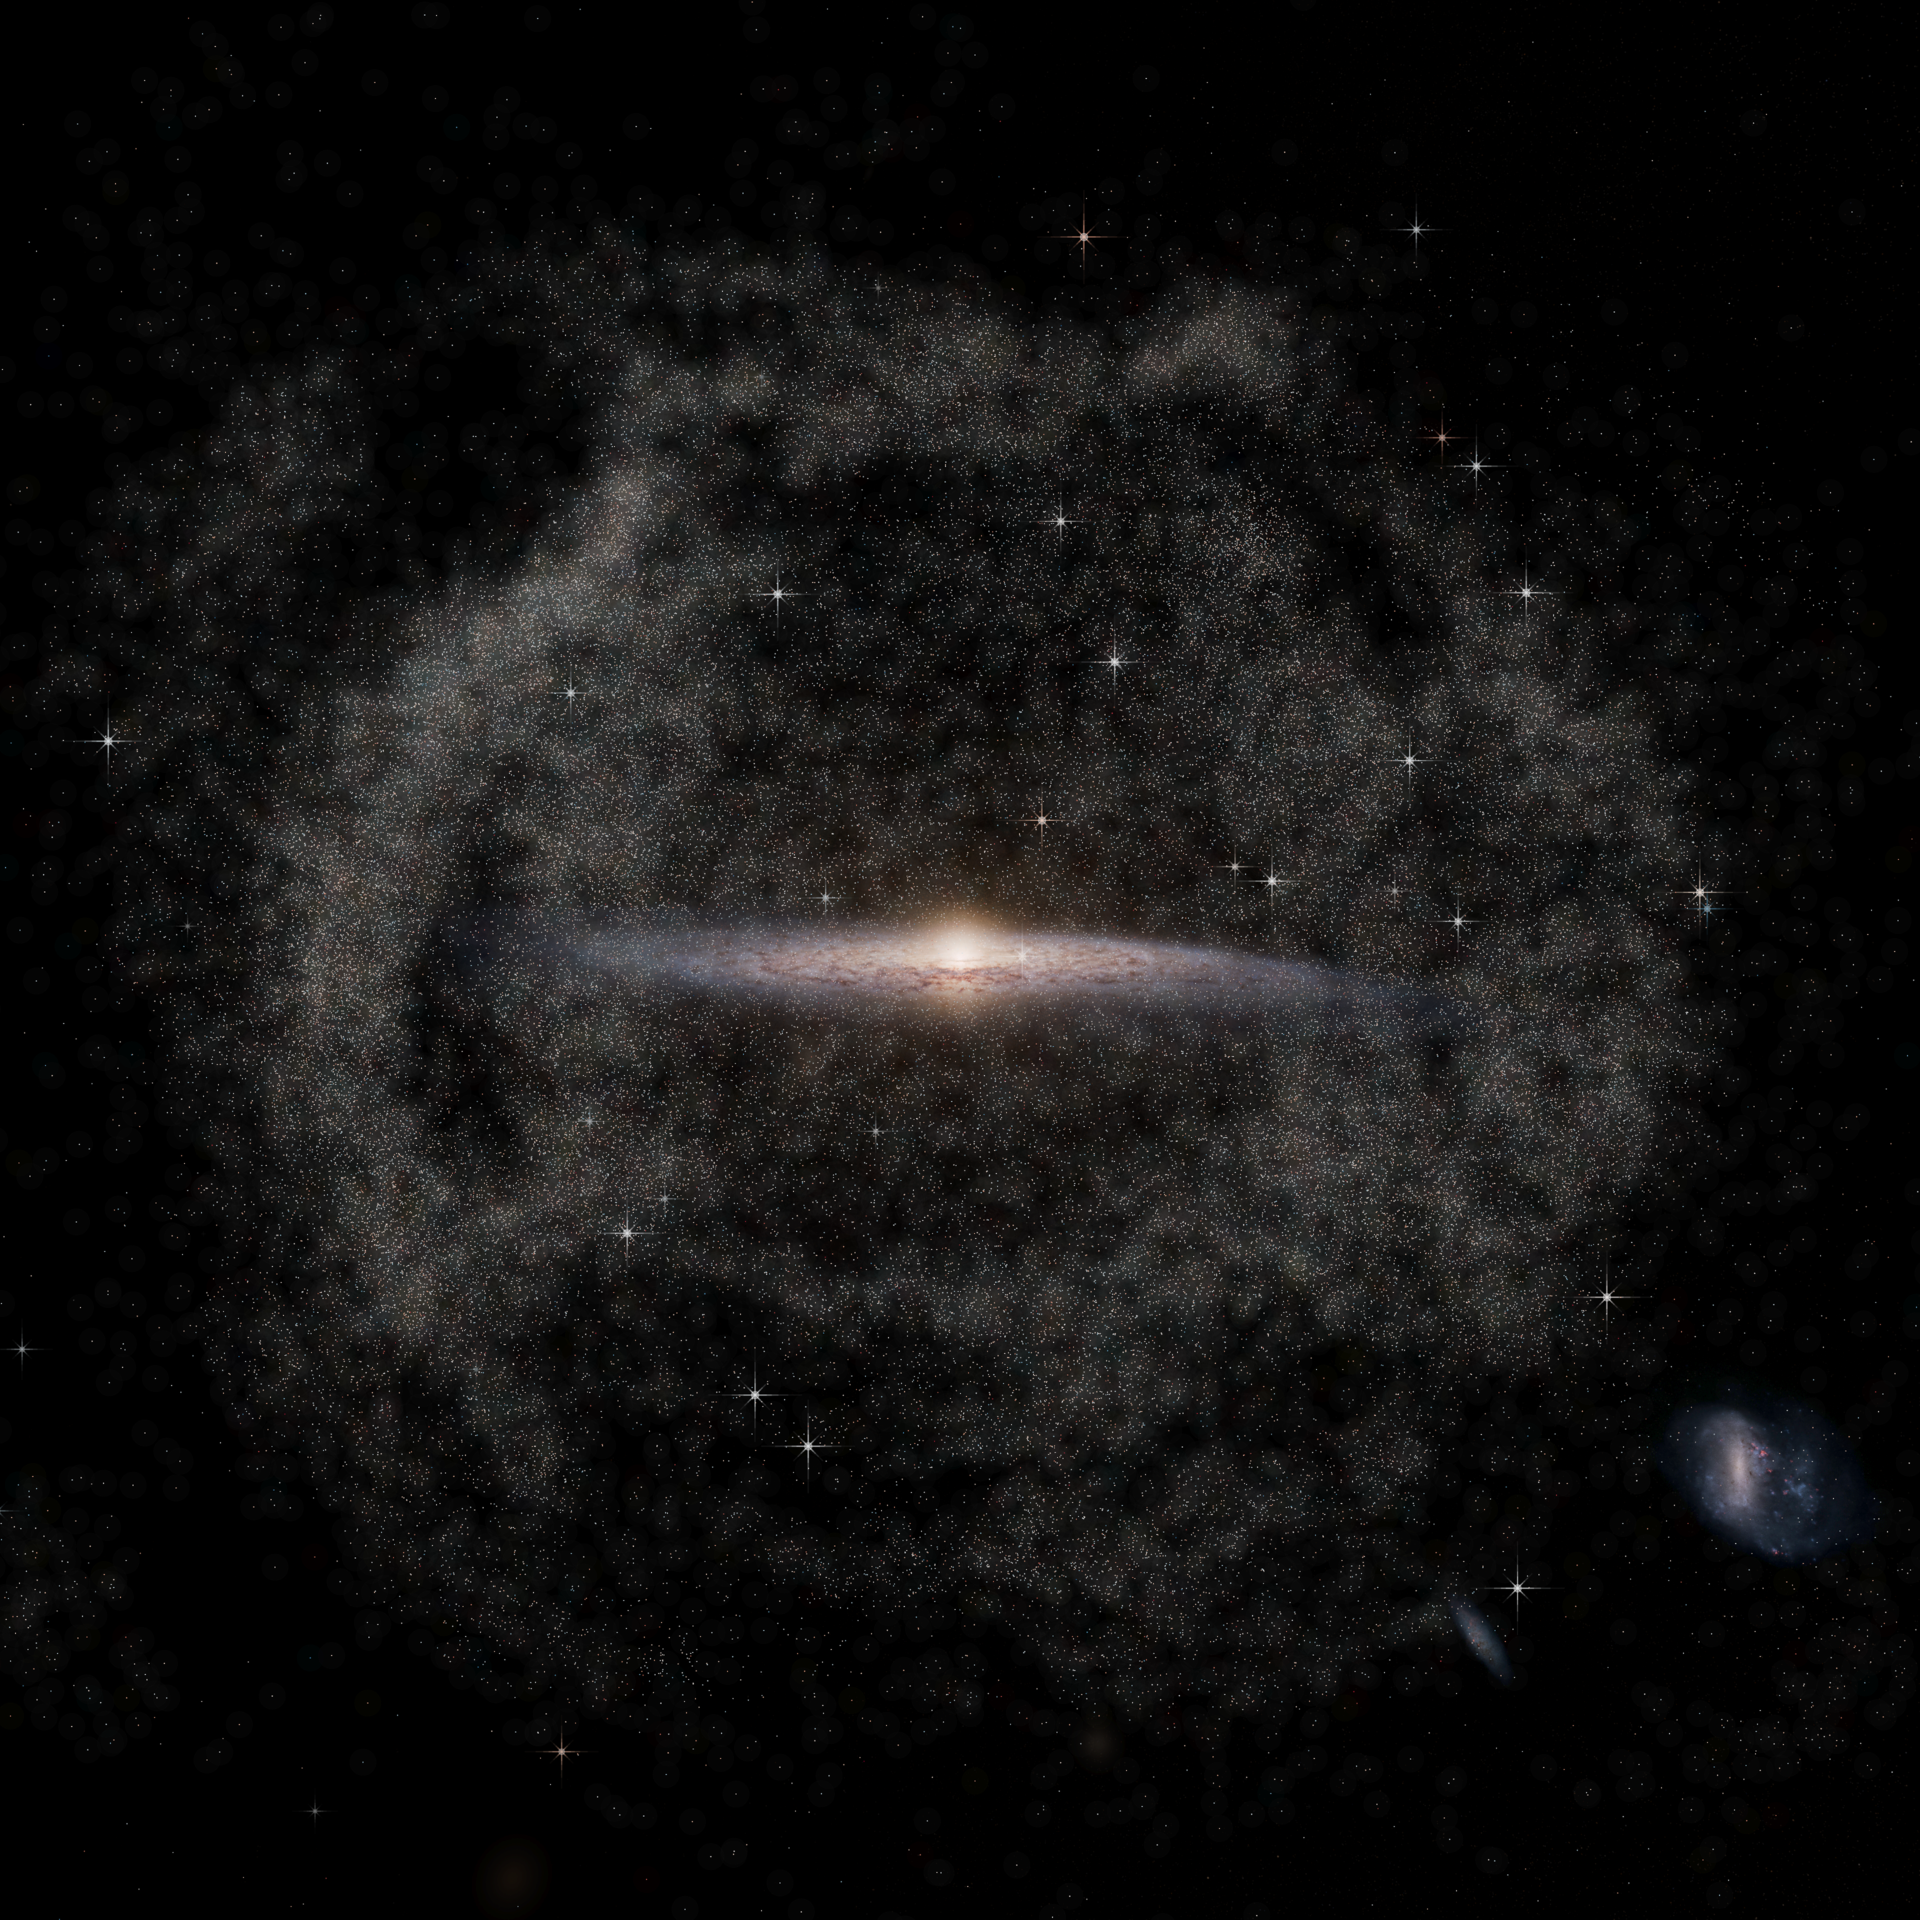 Visualisation of a ‘wrinkly’ halo of stars around the Milky Way